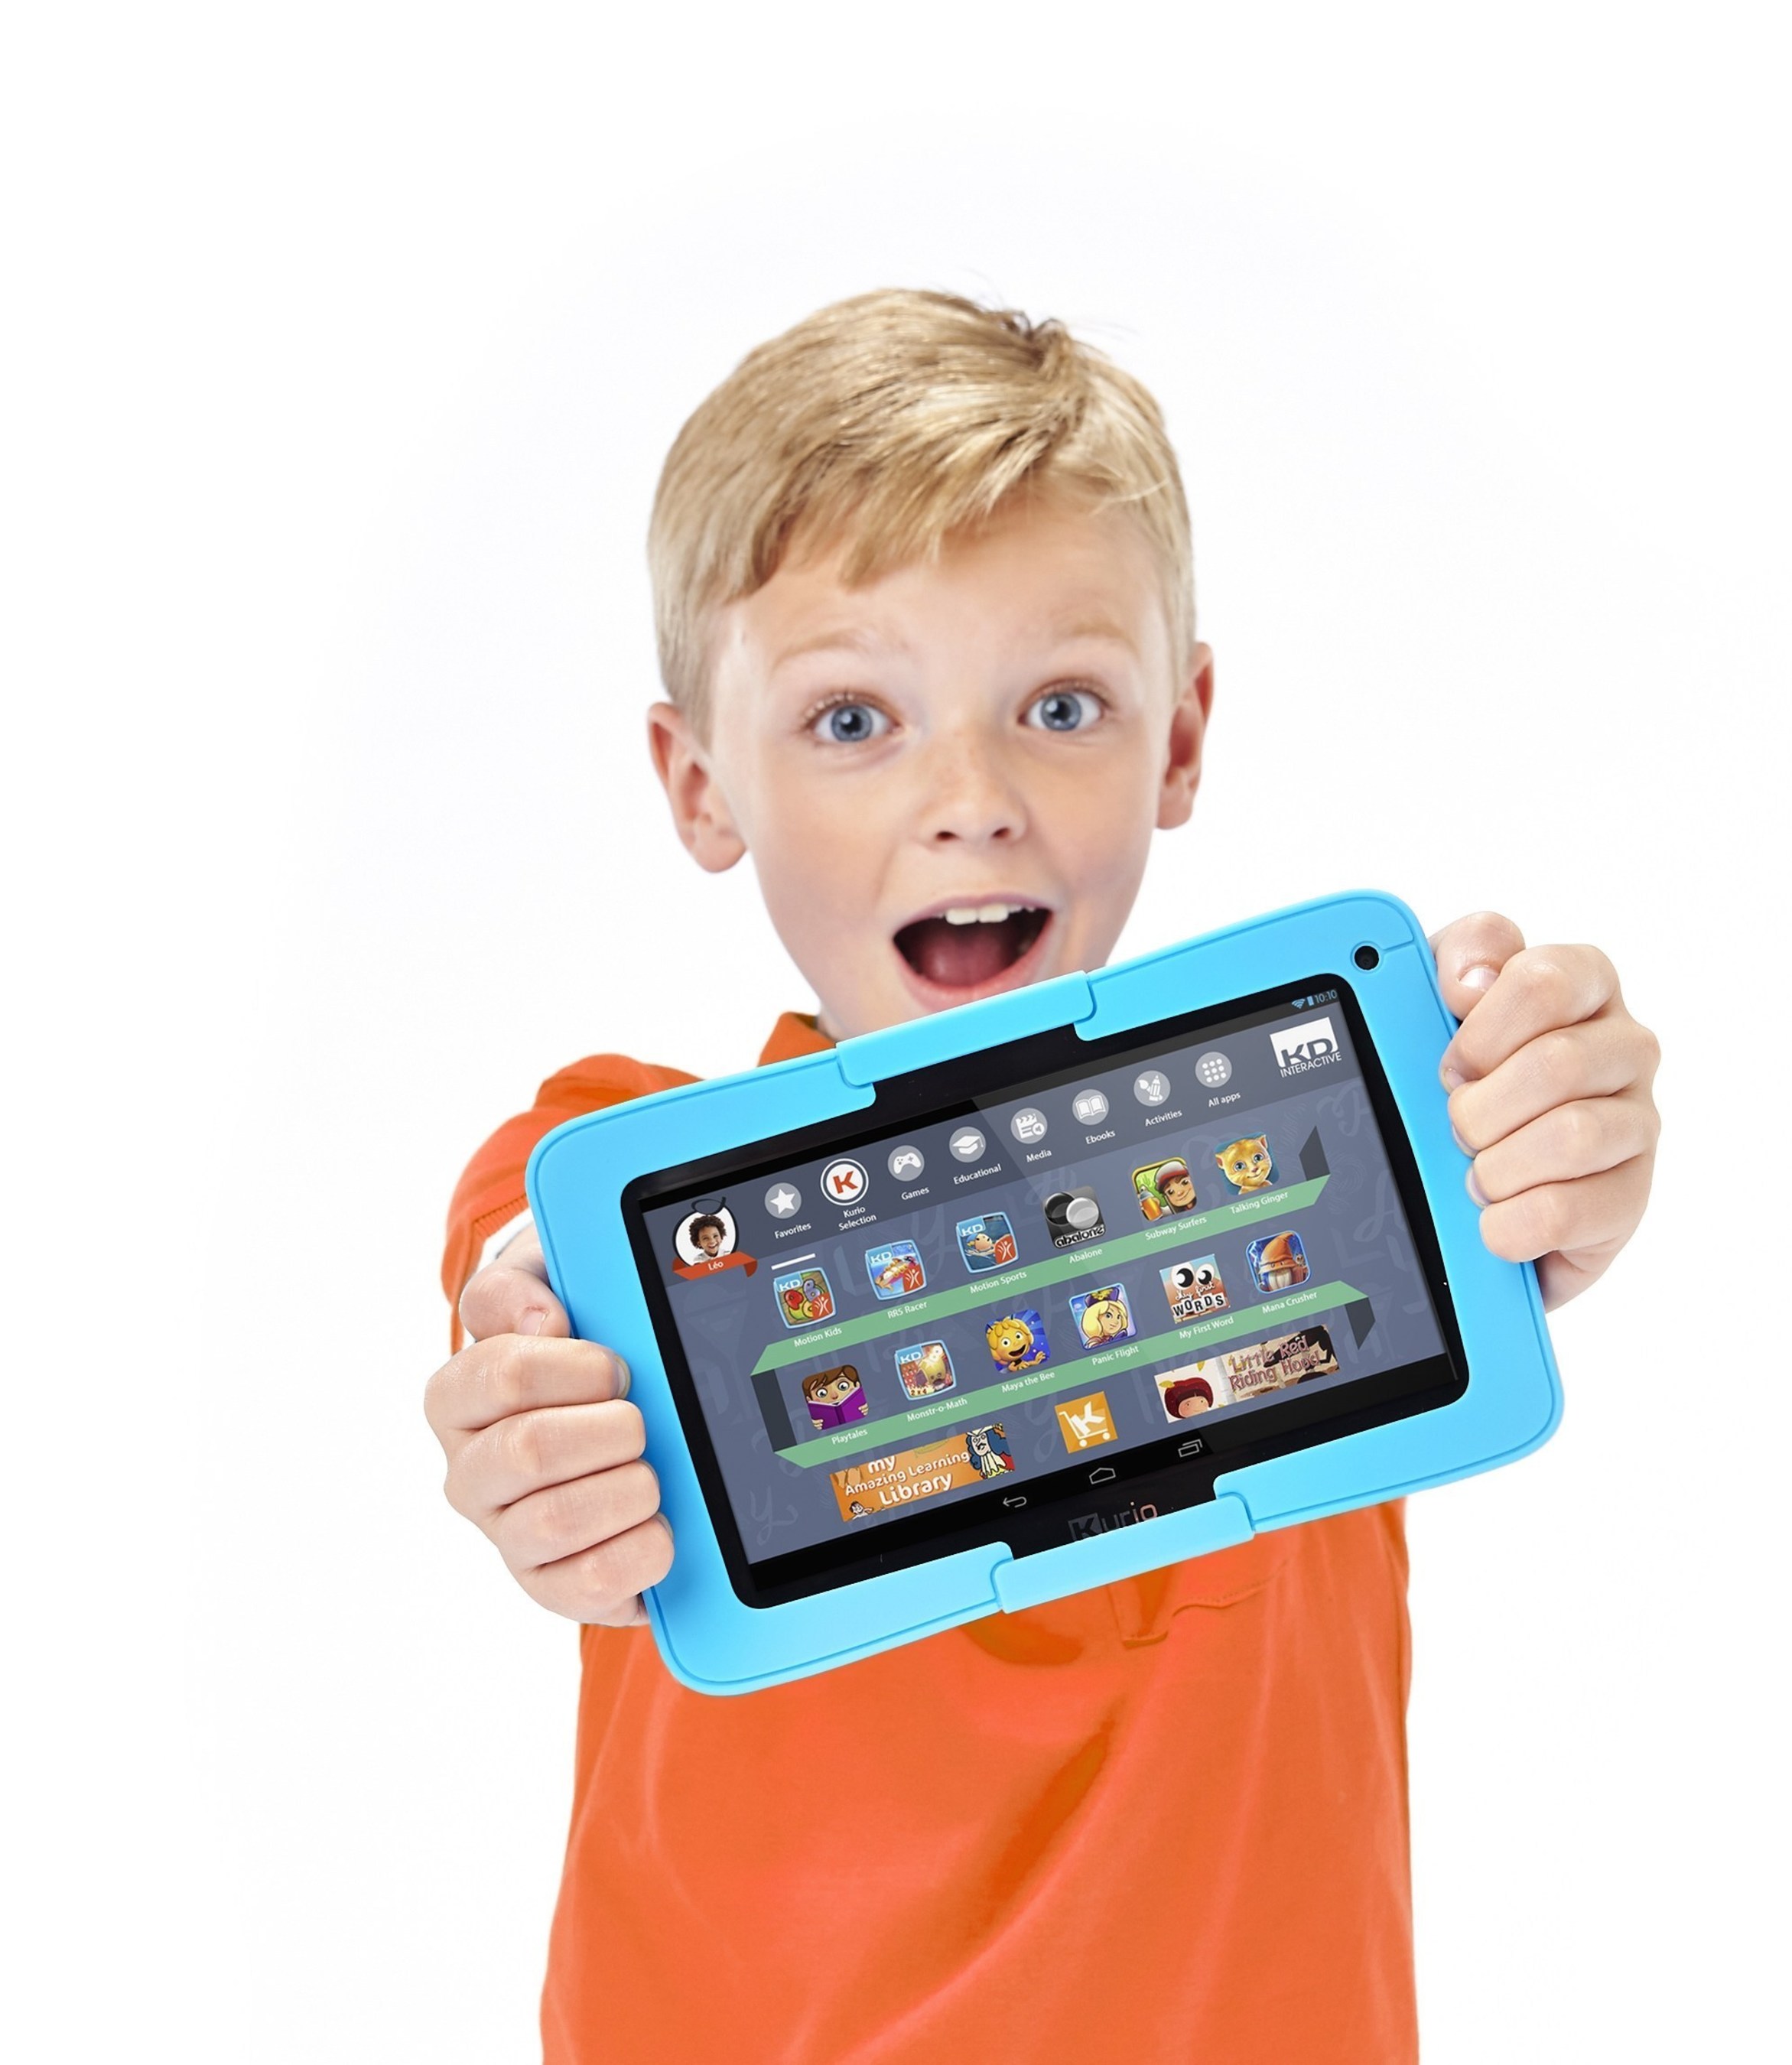 Techno Source takes kid tablets to the next level with Kurio Xtreme - the Ultimate Android Tablet Built for Kids - designed for extreme play and the safest online experience. Featuring a sleek, thinner and lighter design, a faster Intel Atom processor, Bluetooth technology and 24/7 customer support right from the tablet, this upgraded kid device also introduces exclusive Kurio Motion gaming--the first body-controlled games on a tablet. Preloaded with more than $300 of free kid-safe content. (PRNewsFoto/Techno Source) (PRNewsFoto/Techno Source)